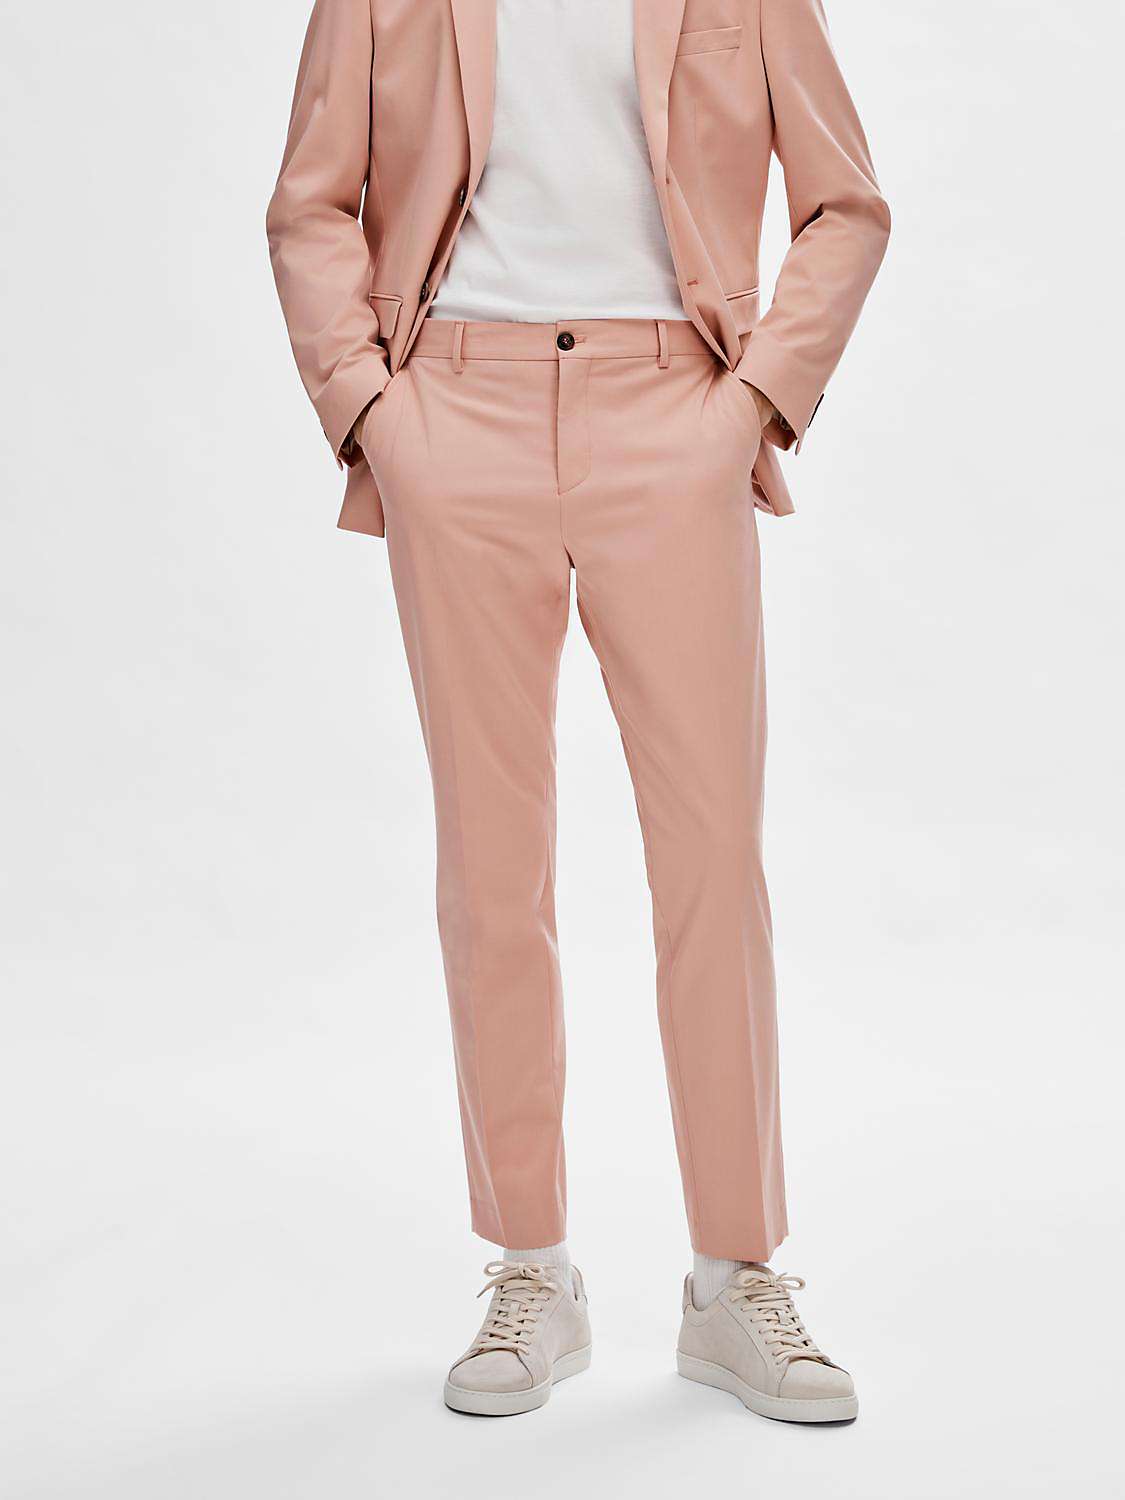 Buy SELECTED HOMME Liam Slim Fit Suit Trousers, Misty Rose Online at johnlewis.com